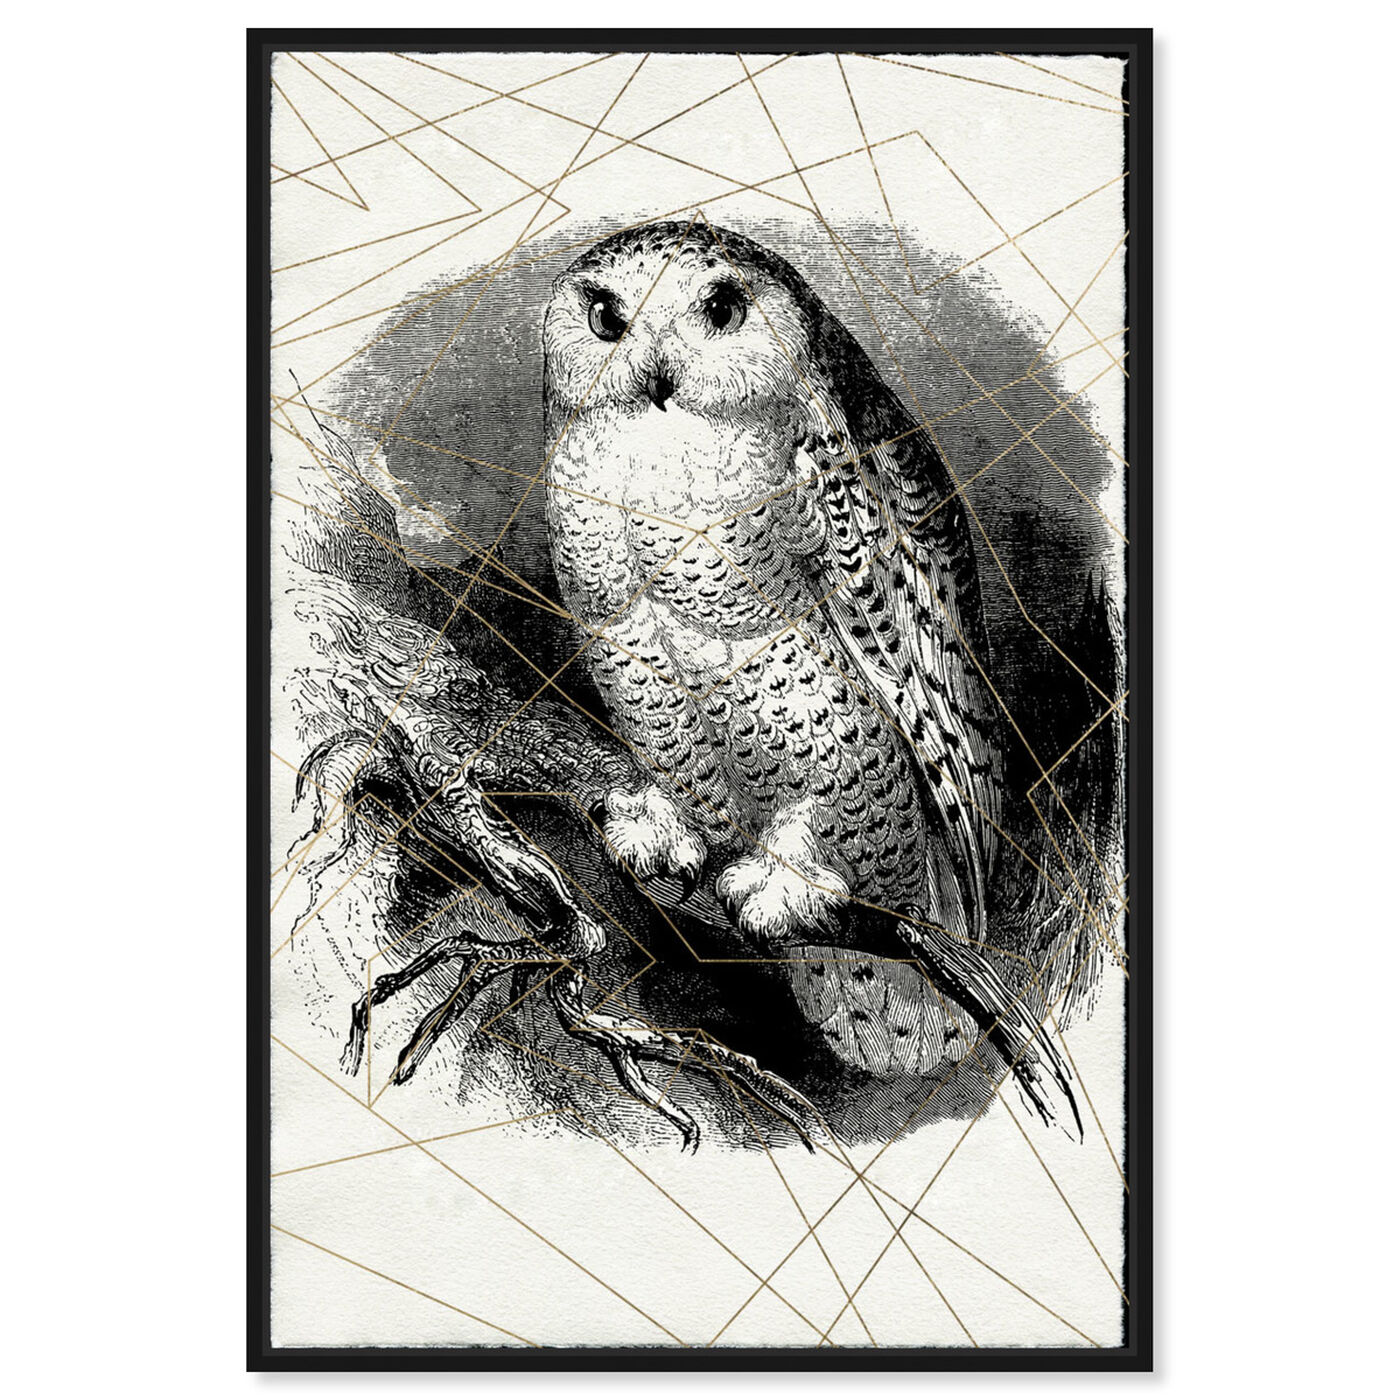 Front view of Owl Print featuring animals and birds art.